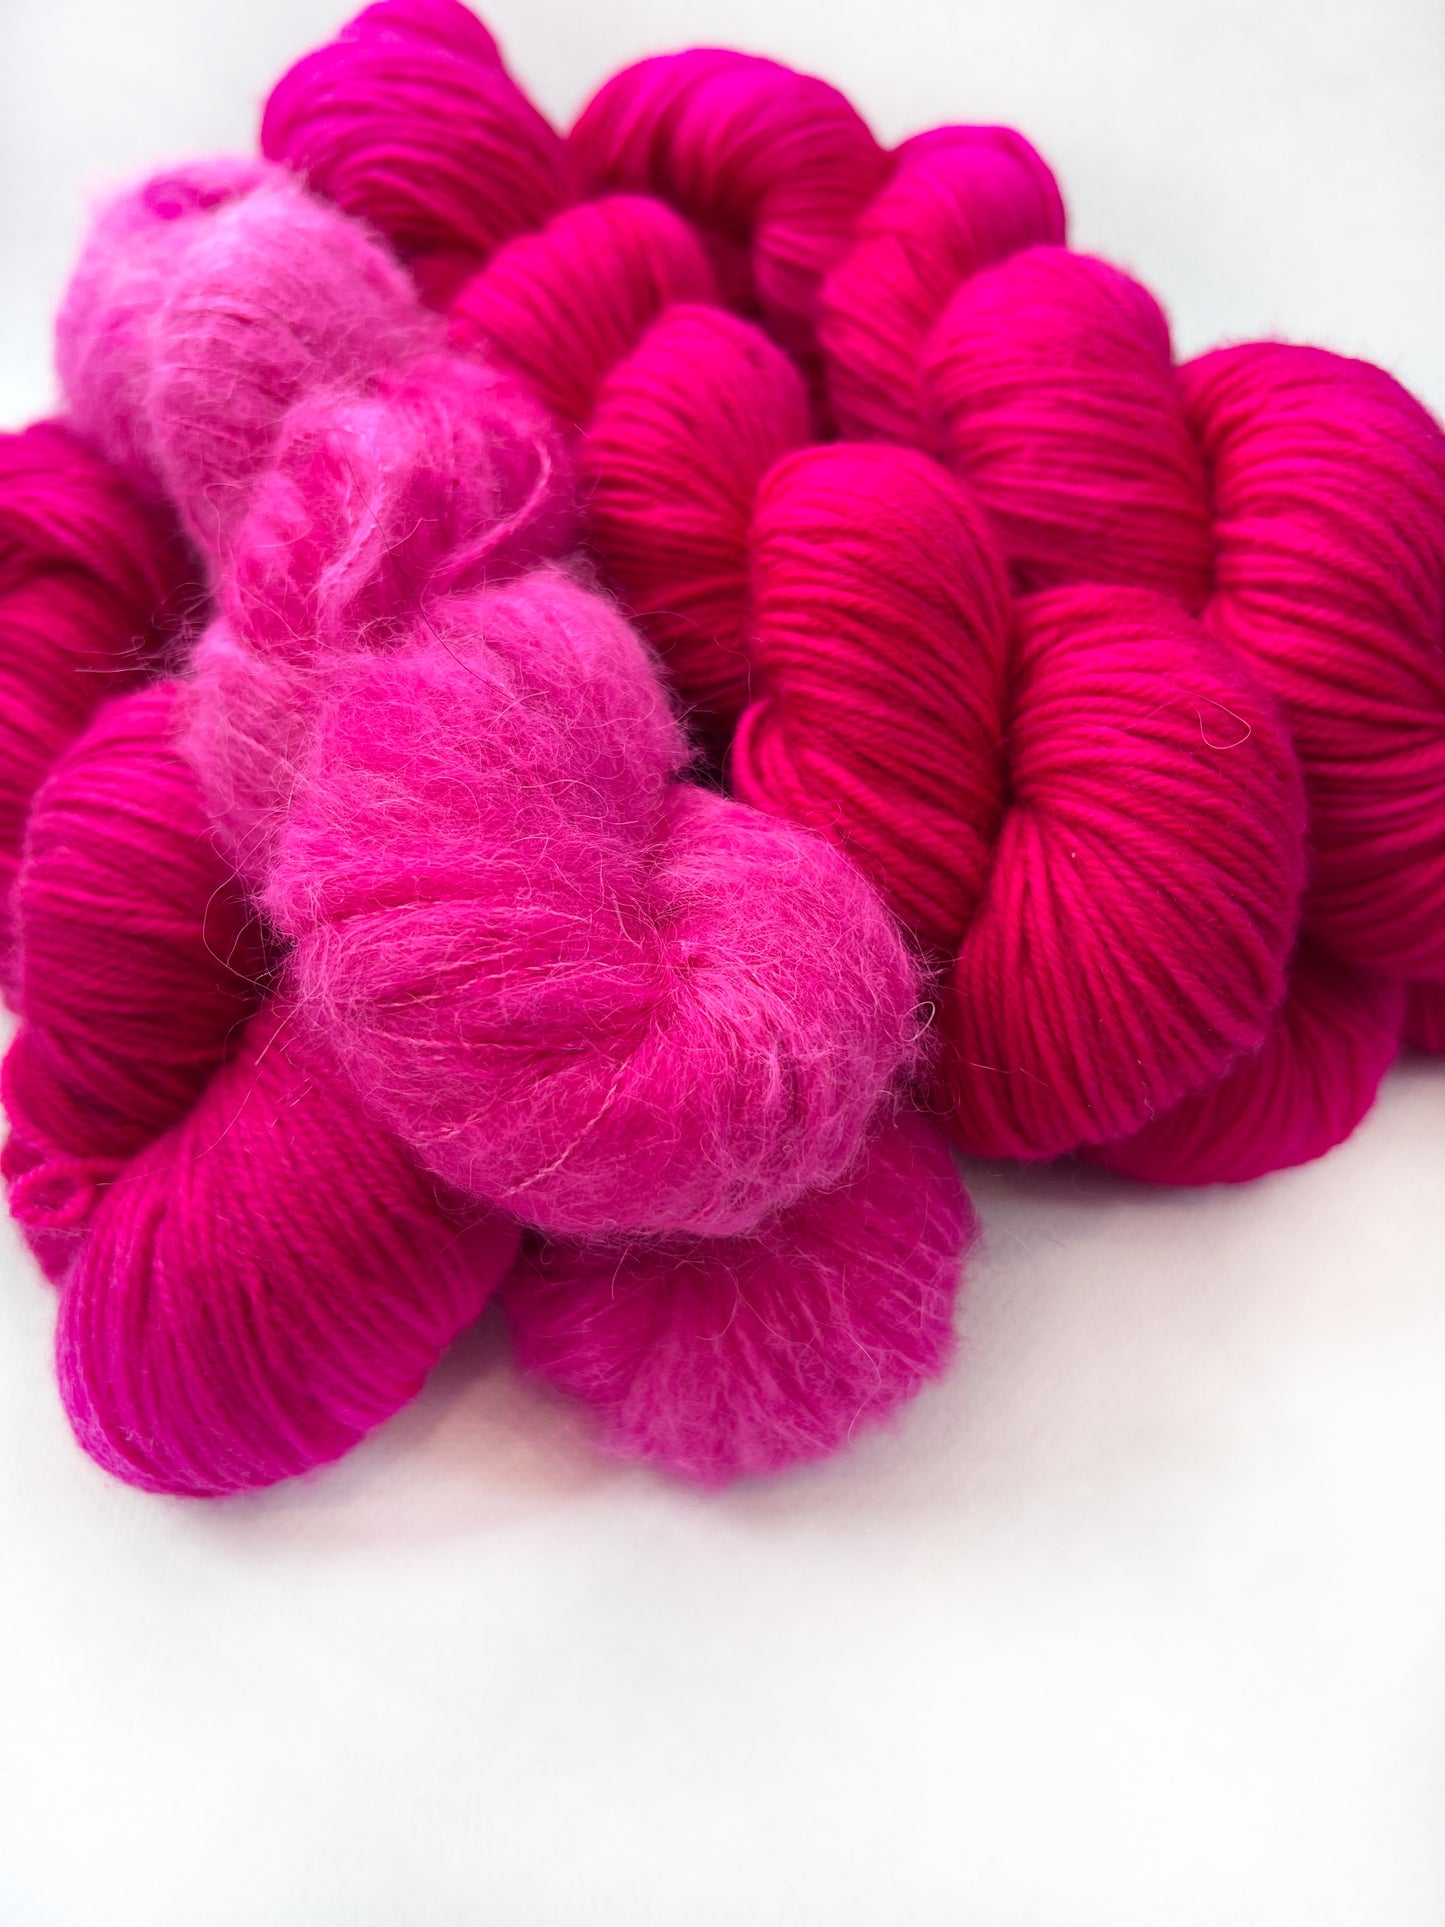 Mag the Magnificent - Fingering 3 Ply - Okanagan Dye Works